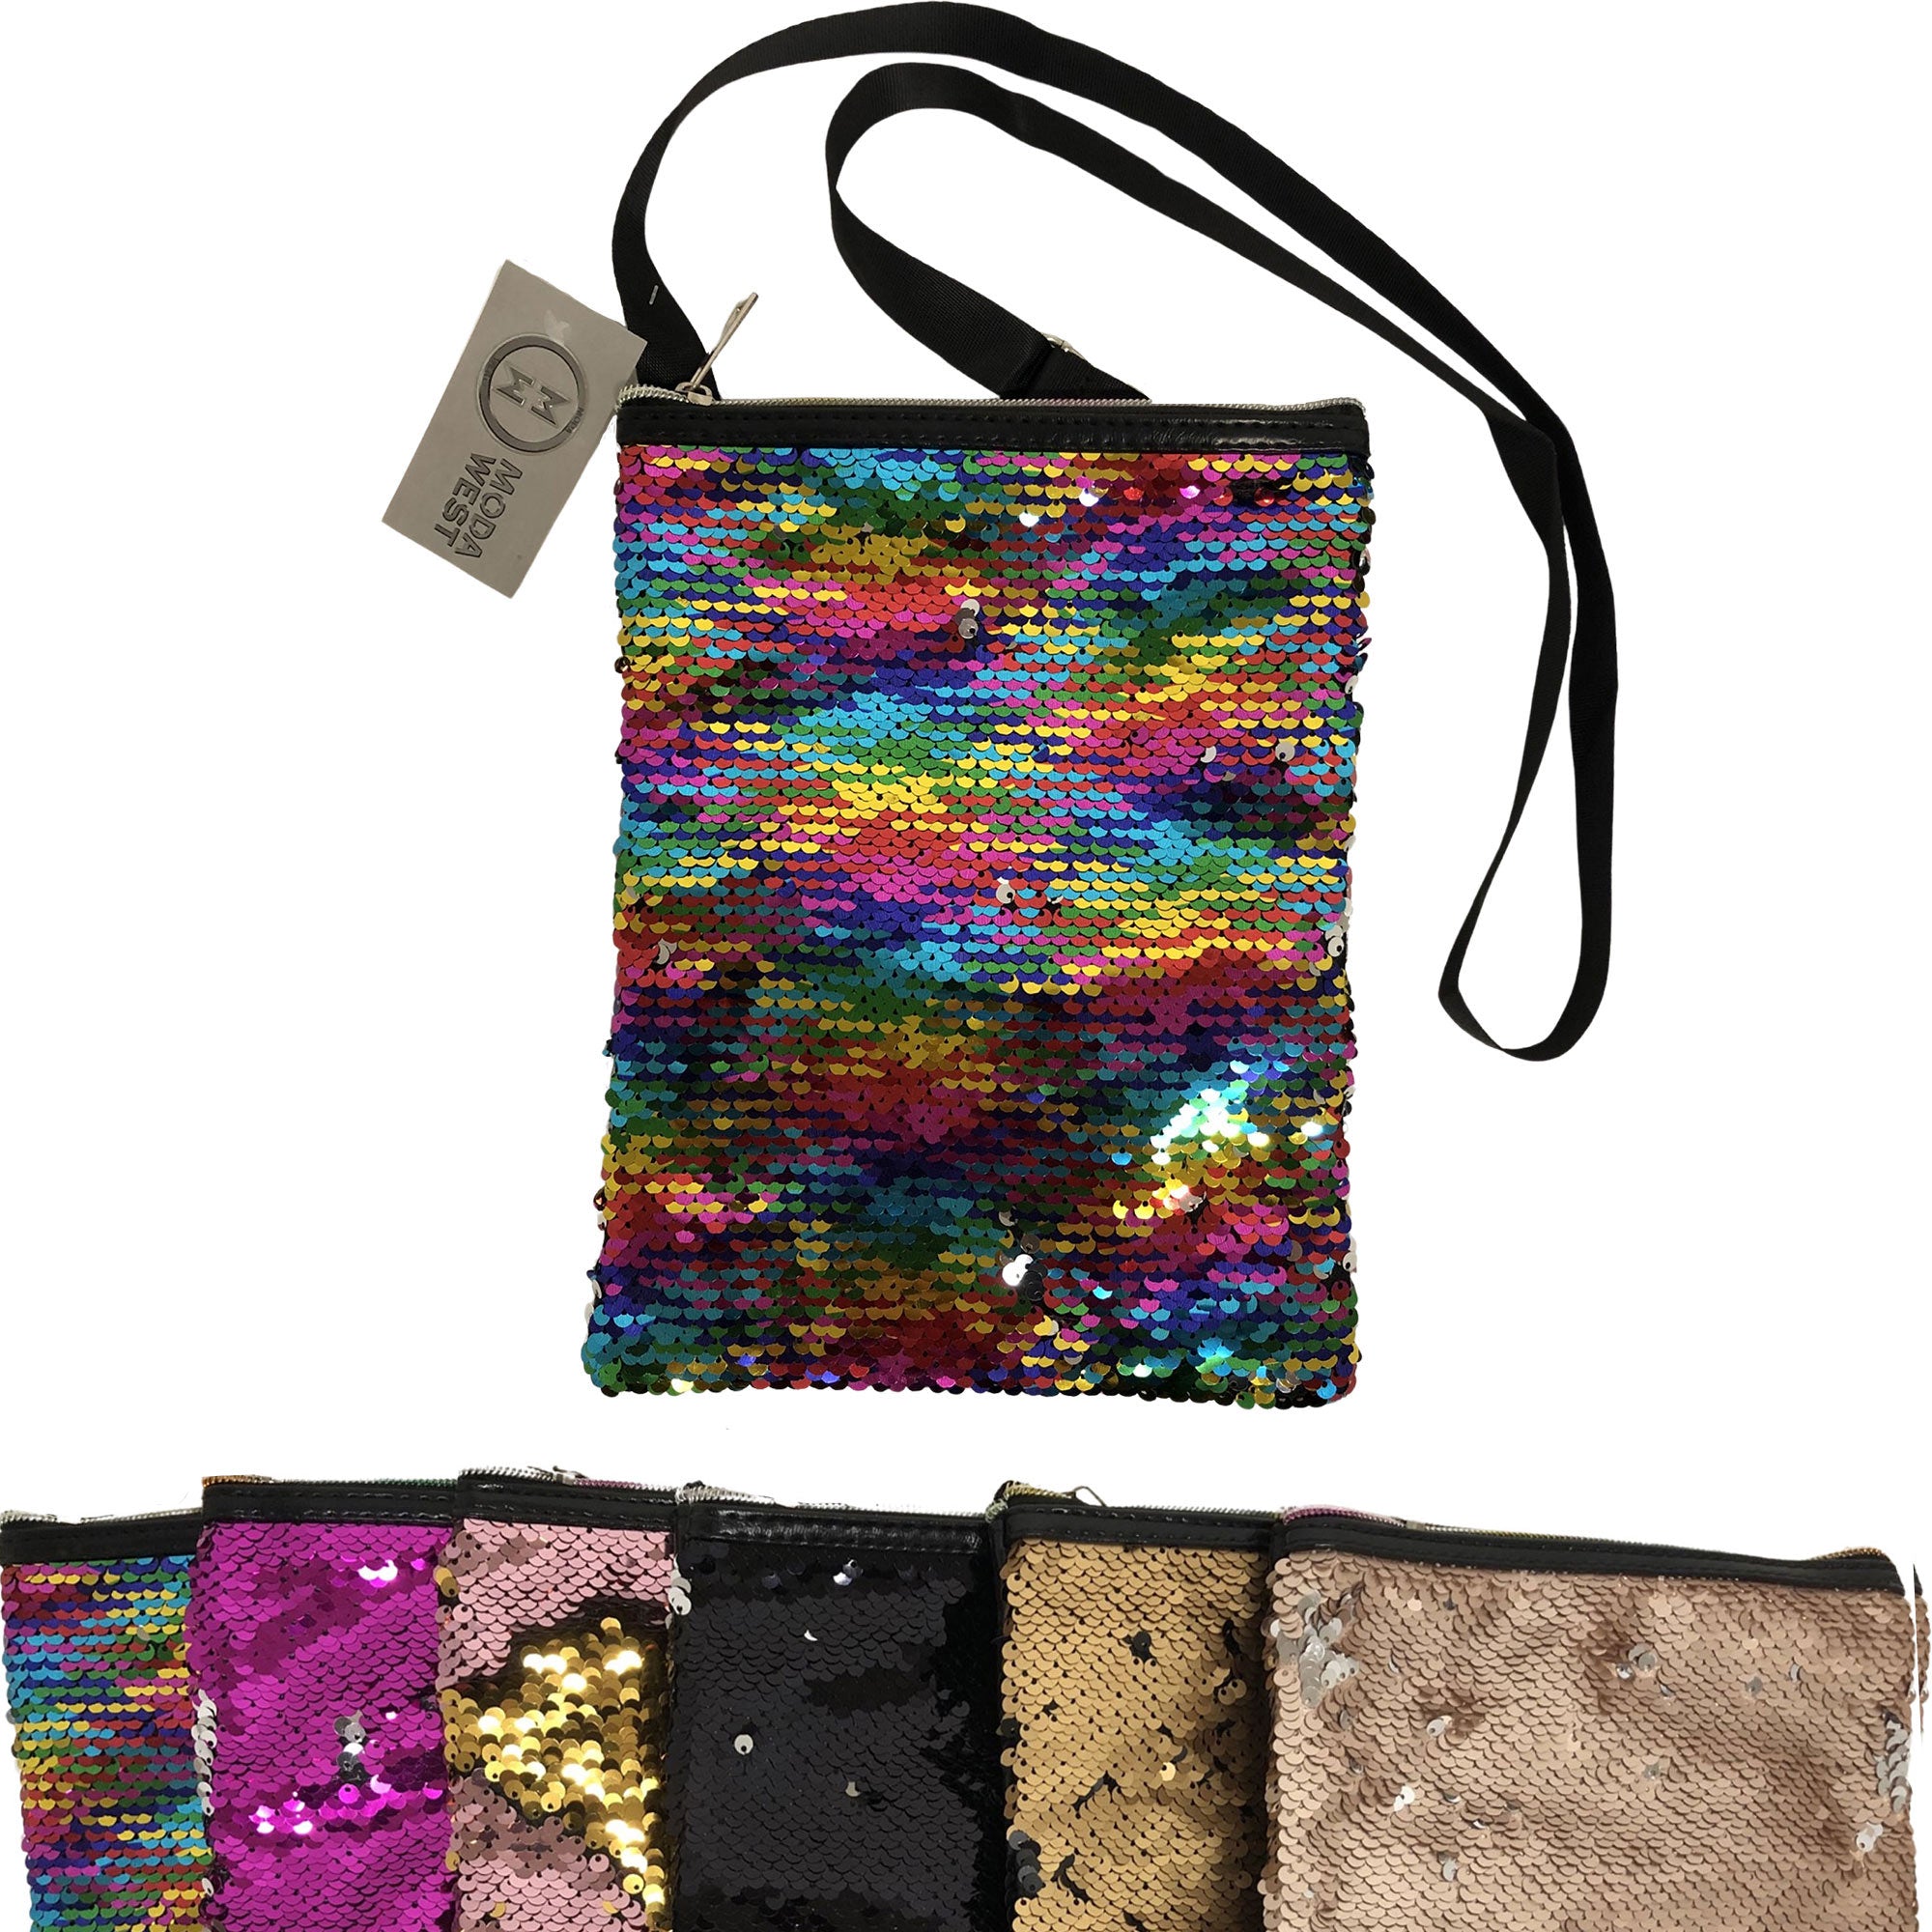 CLEARANCE BRUSH SEQUIN CROSSBODY BAG (CASE OF 60 - $1.00 / PIECE)  Wholesale Sequin Crossbody in Assorted Colors SKU: 313-SEQ-60